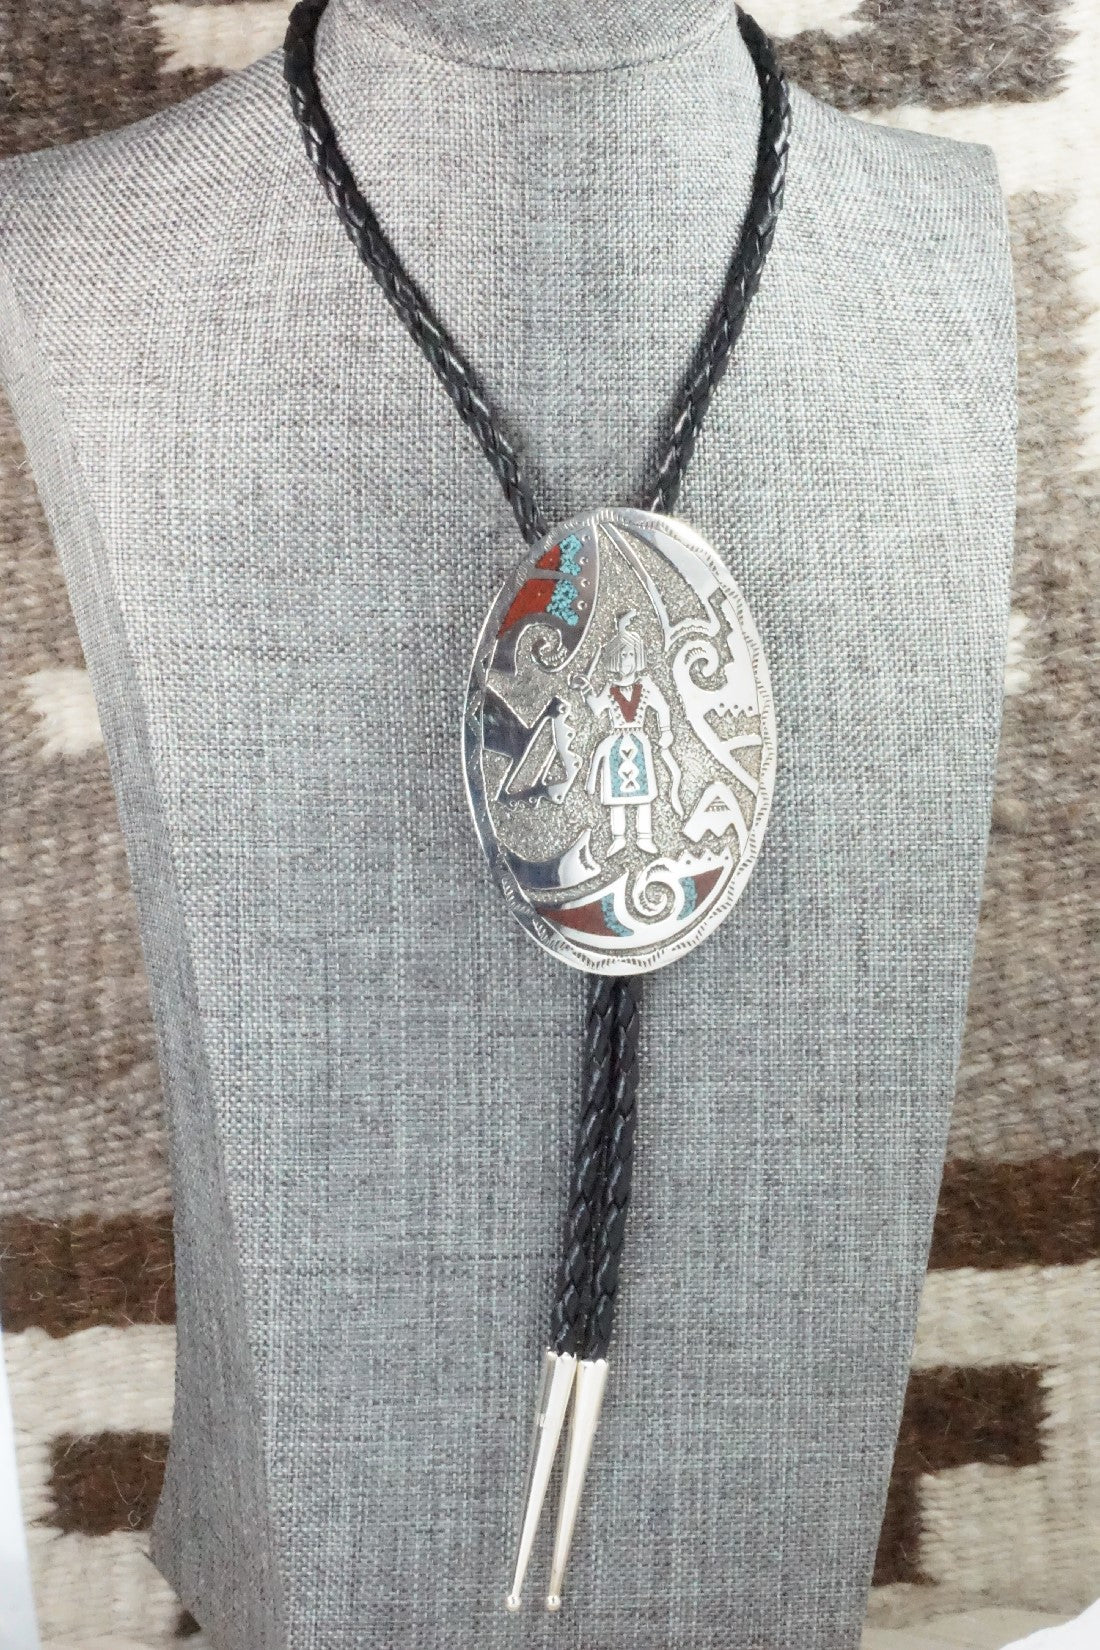 Turquoise, Coral & Sterling Silver Bolo Tie - Raymond Begay